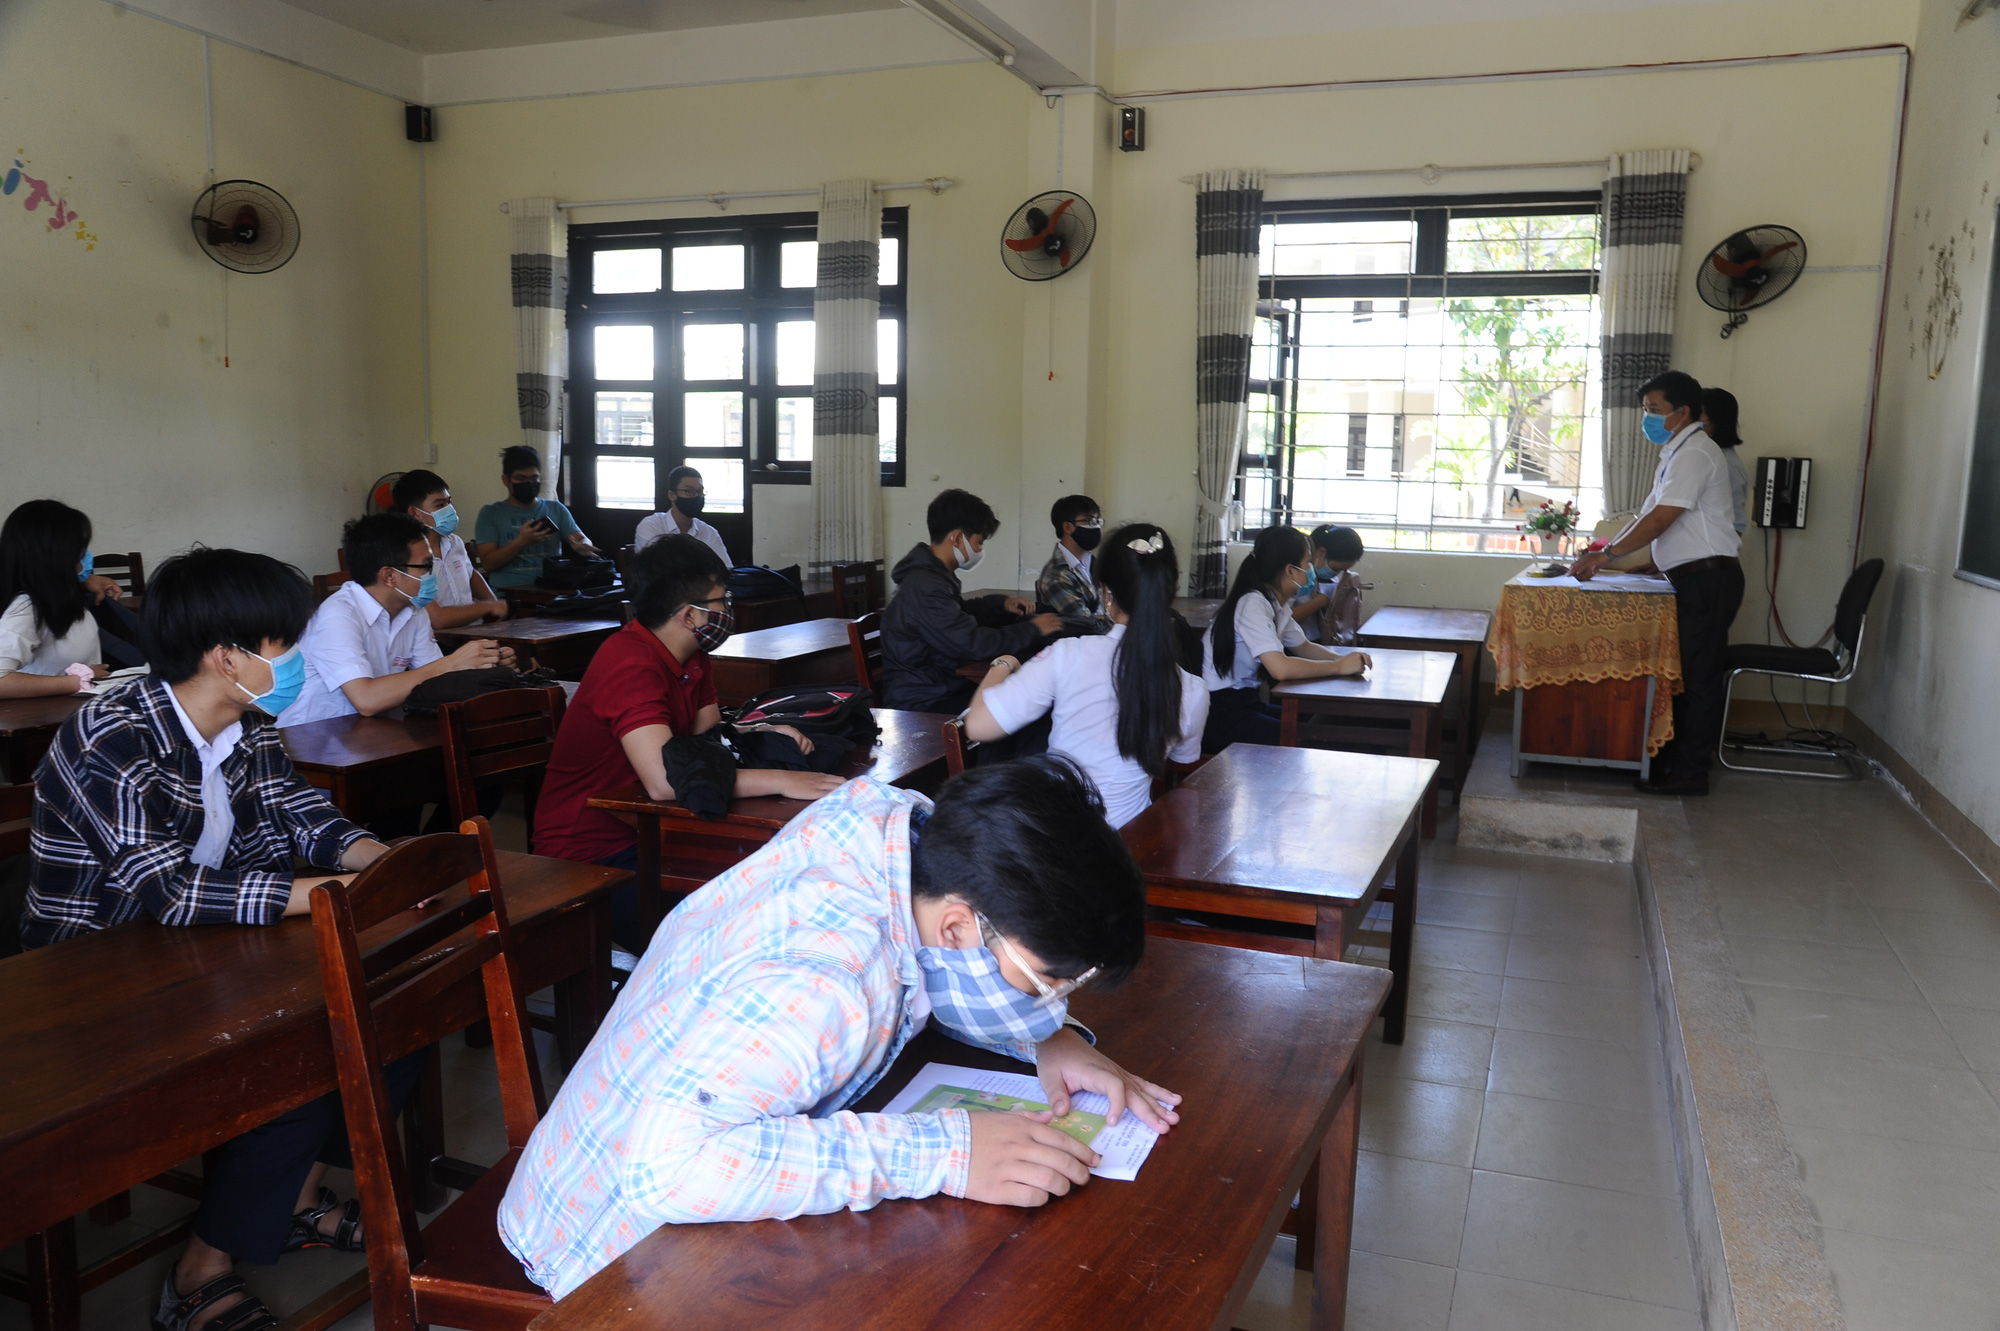 Nearly 1,300 screened after exam supervisor contracts coronavirus in central Vietnam